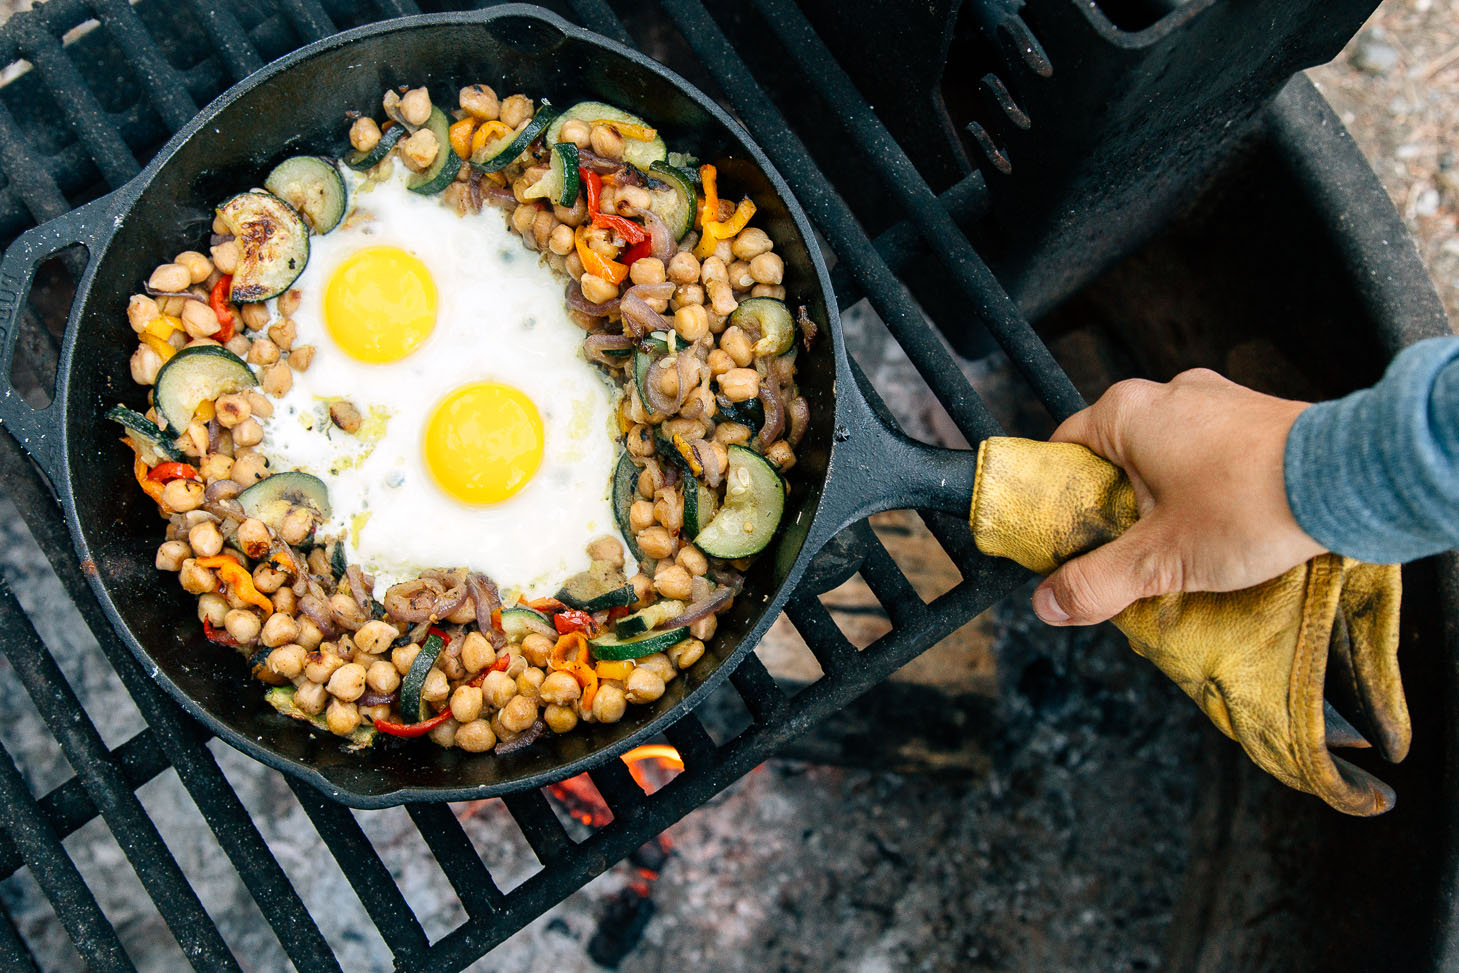 Cooking eggs in a cast iron skillet on a campfire